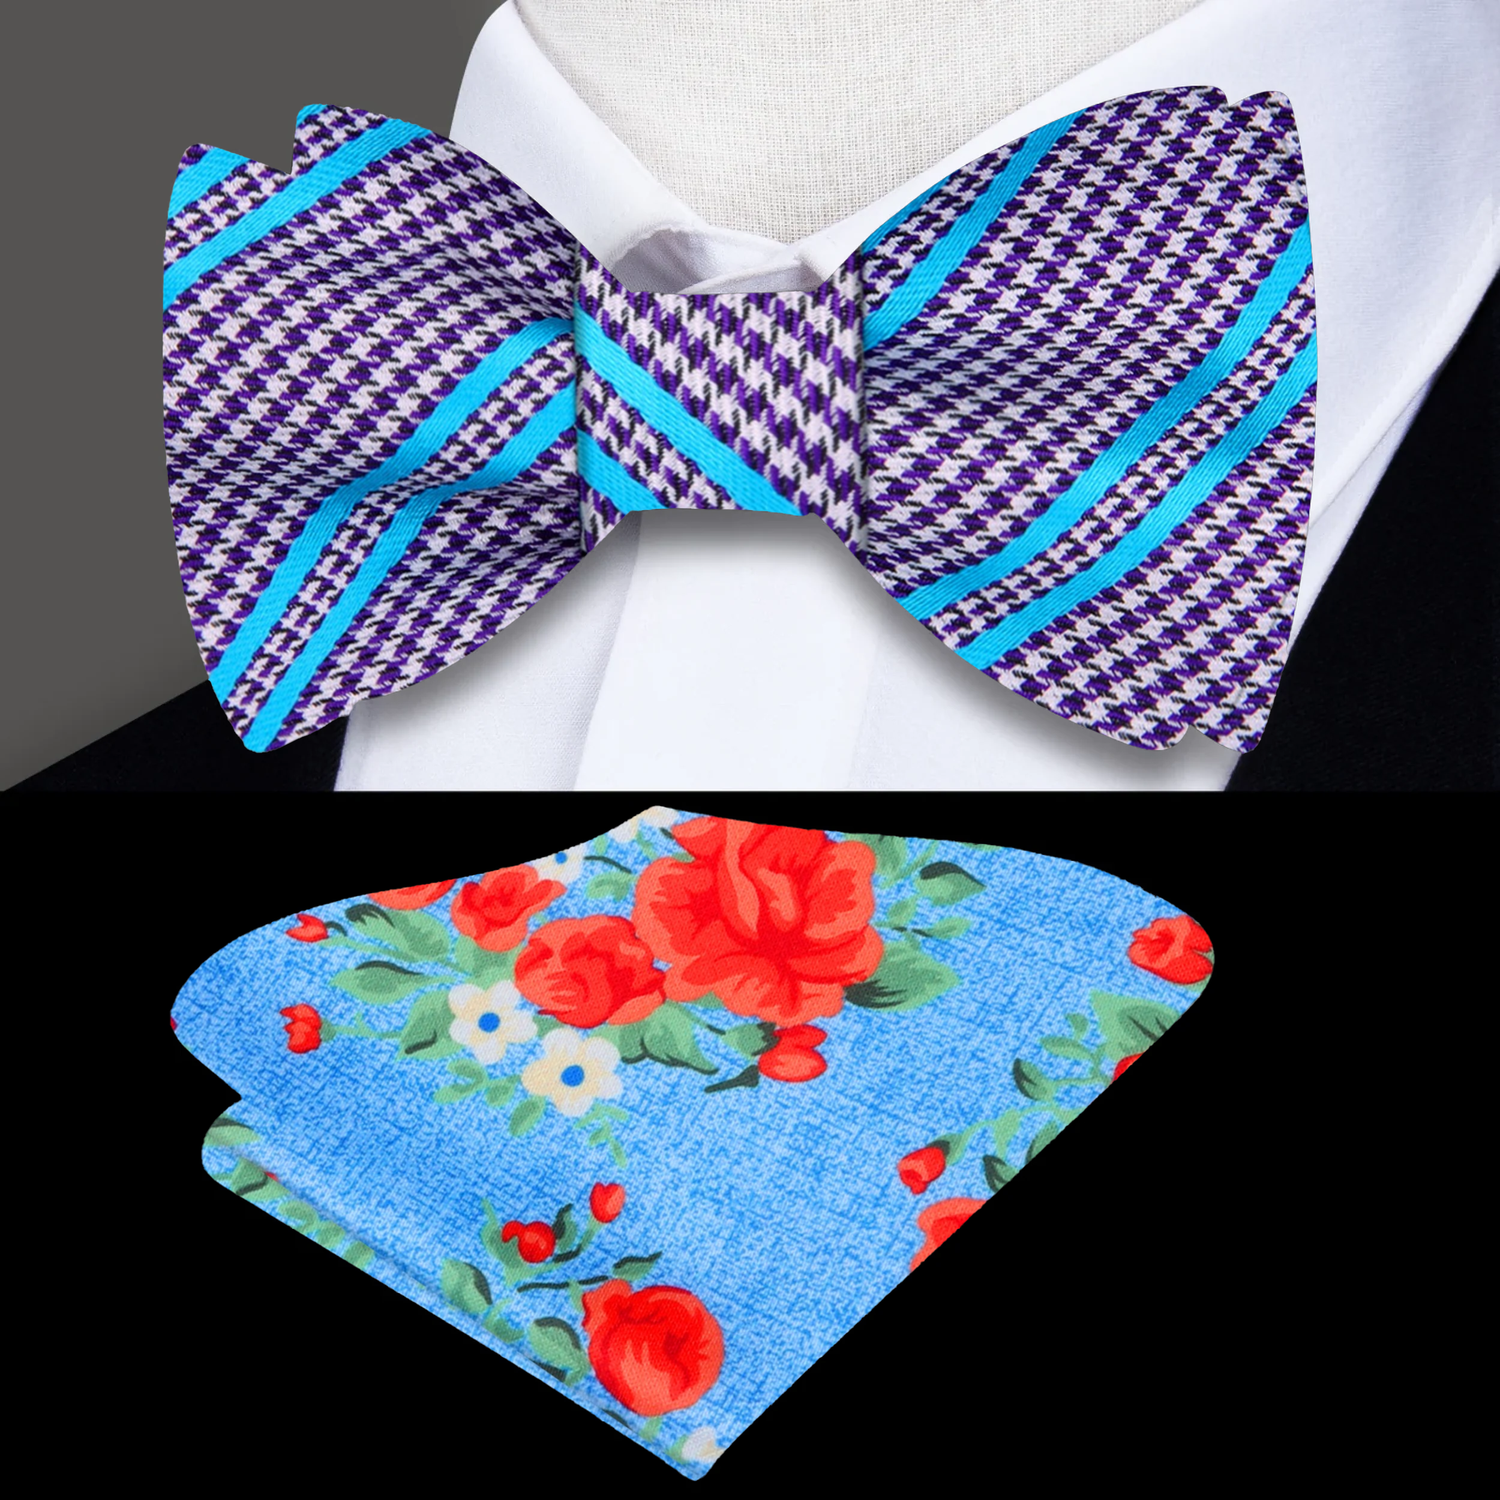 A Grape, Blue Houndstooth with Stripe Pattern Silk Self Tie Bow Tie, Accenting Floral Pocket Square